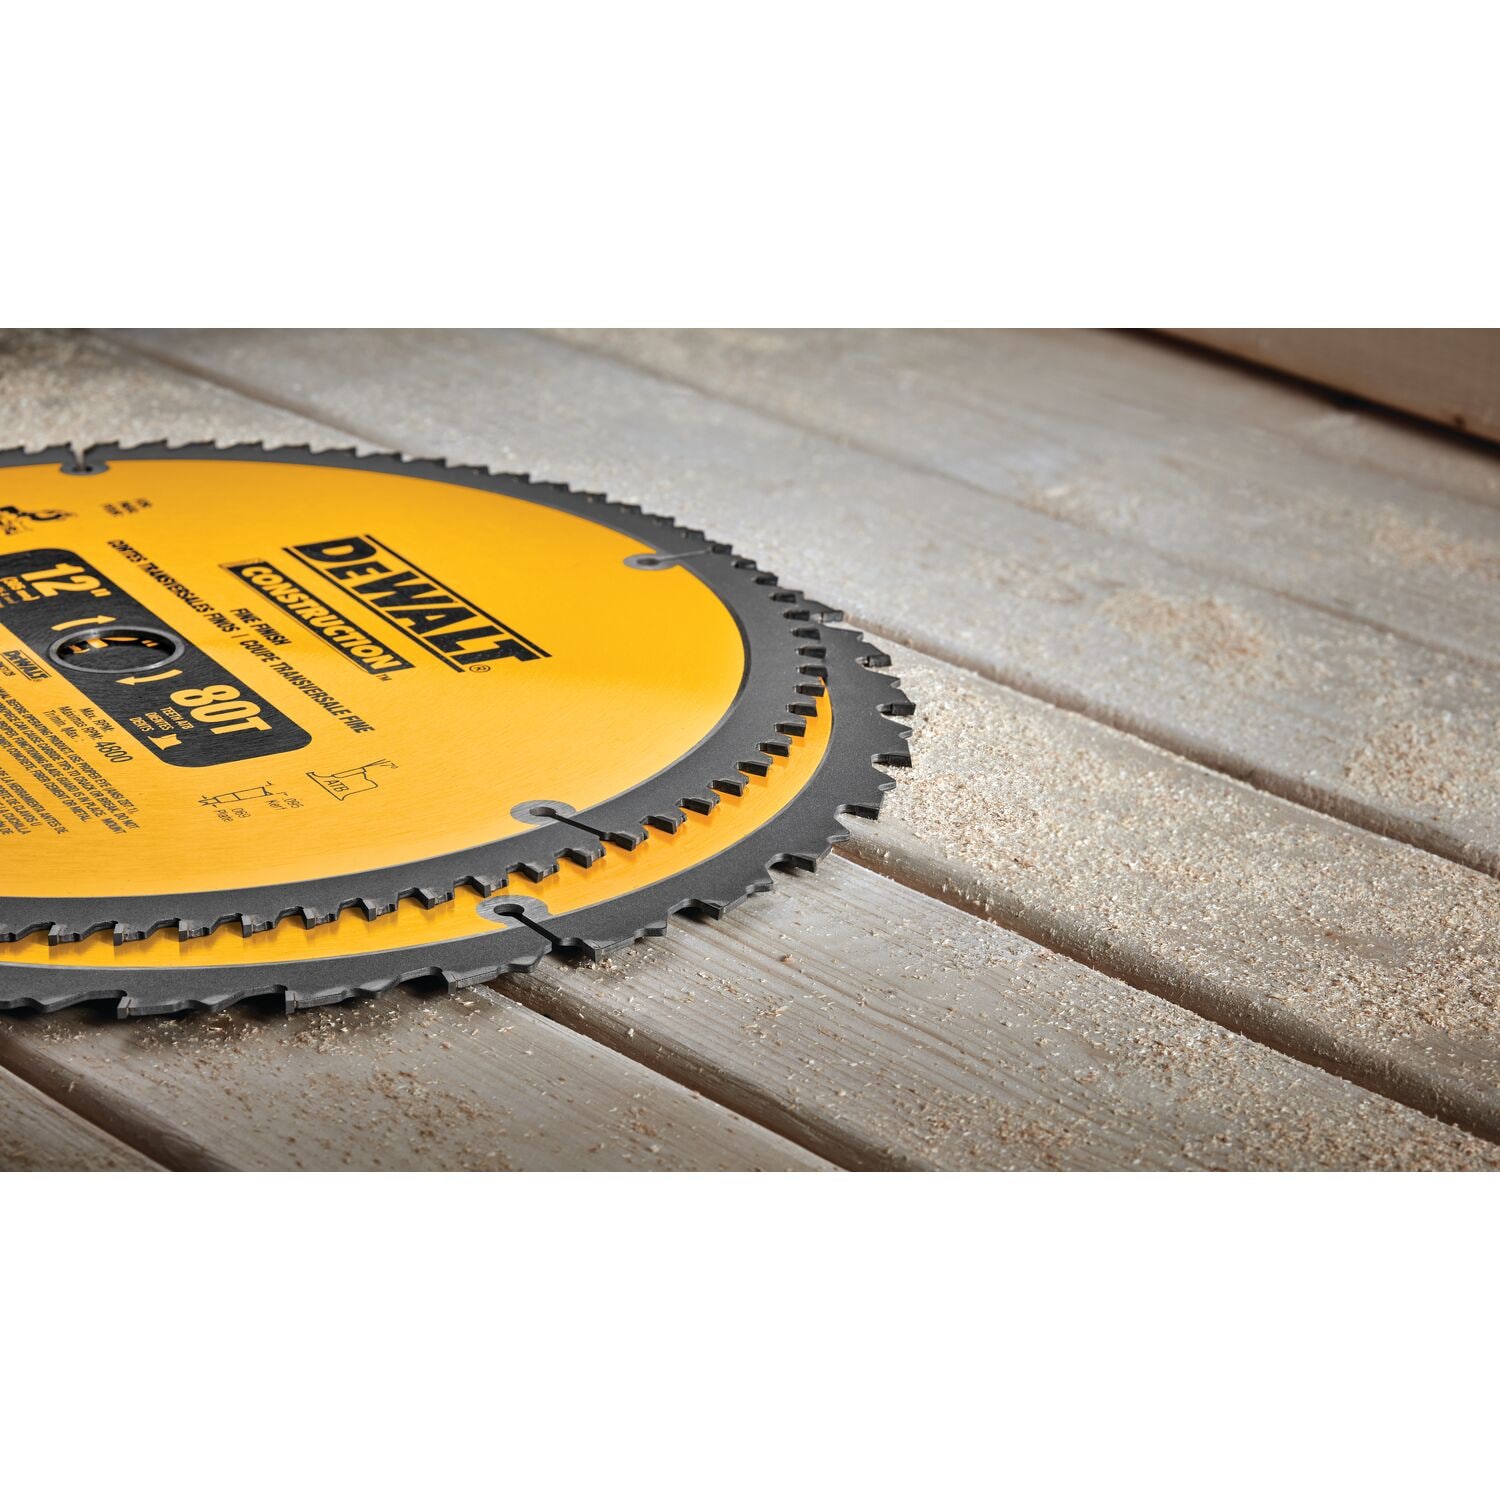 DEWALT 12-in 32 and 80-Tooth Fine Finish Carbide Miter/Table Saw Blade Set 2-Pack) in the Circular Saw Blades department at